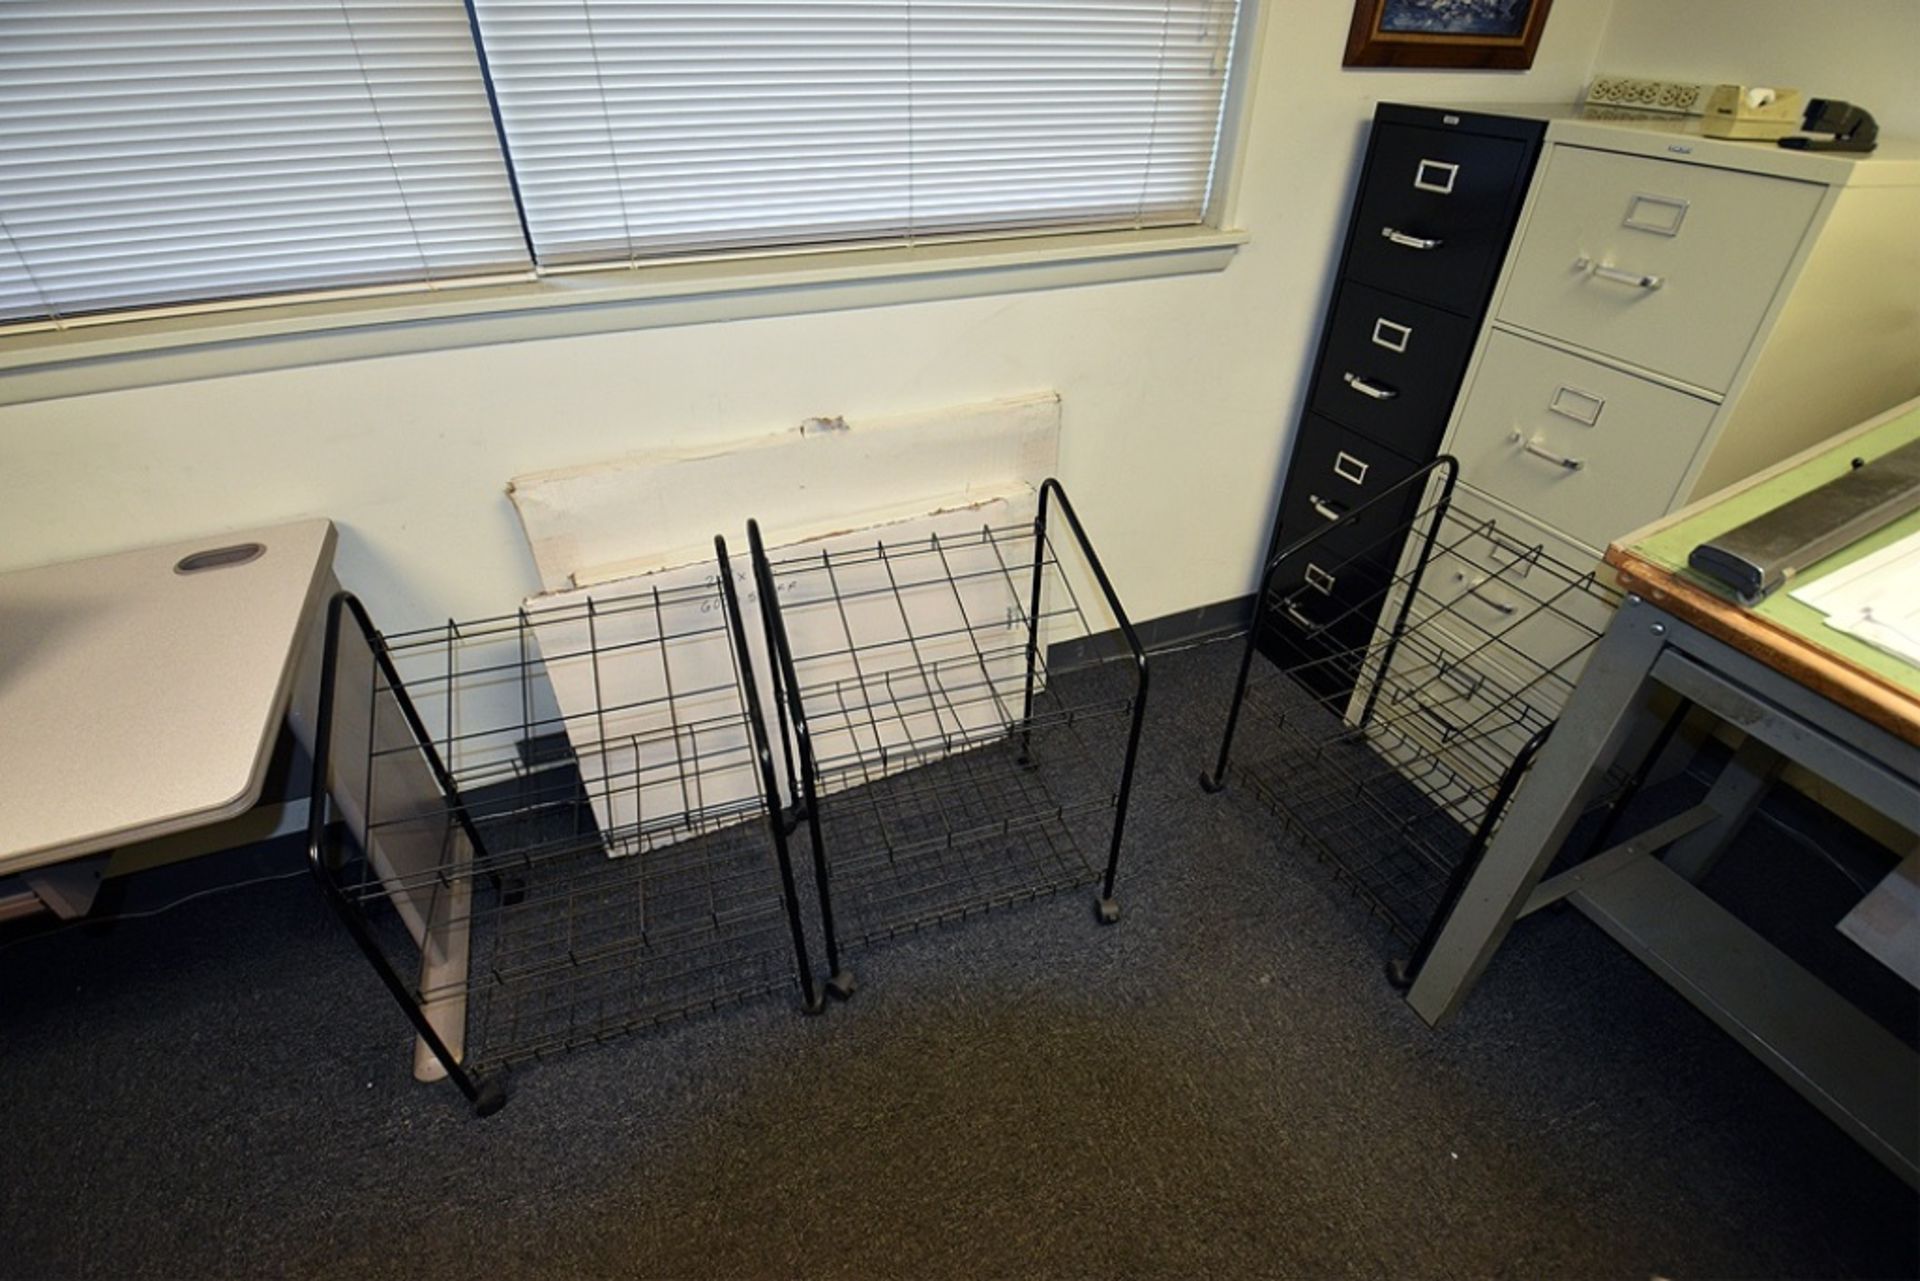 Desks, Shelves, Office Chairs, and File Cabinets Throughout Office - Image 3 of 3